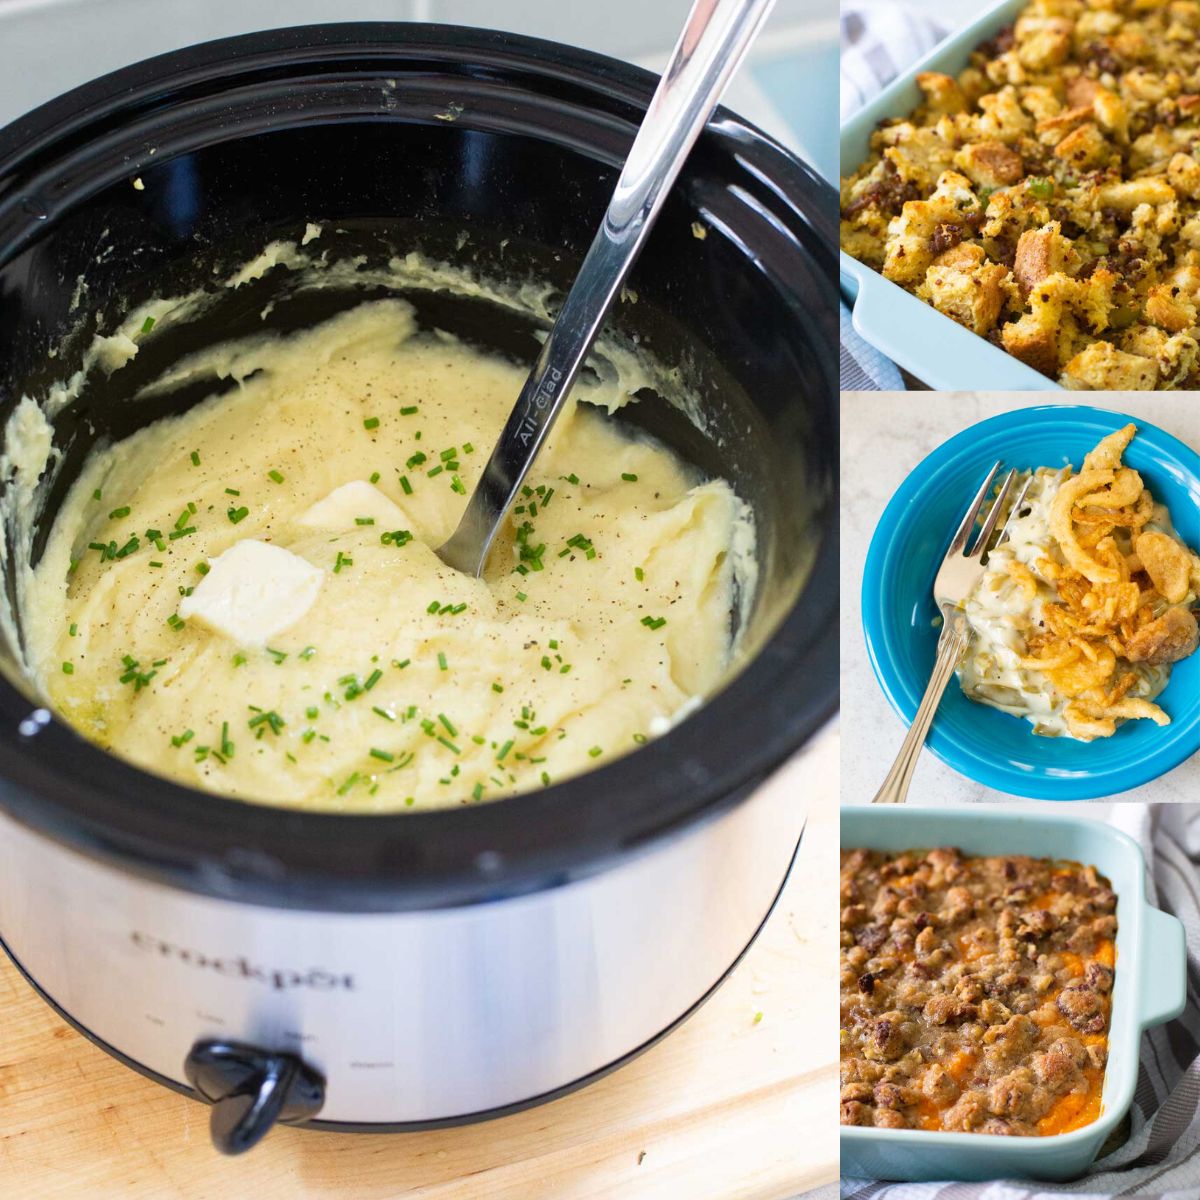 The photo collage shows the easy Thanksgiving side dishes -- potatoes, stuffing, and green beans.